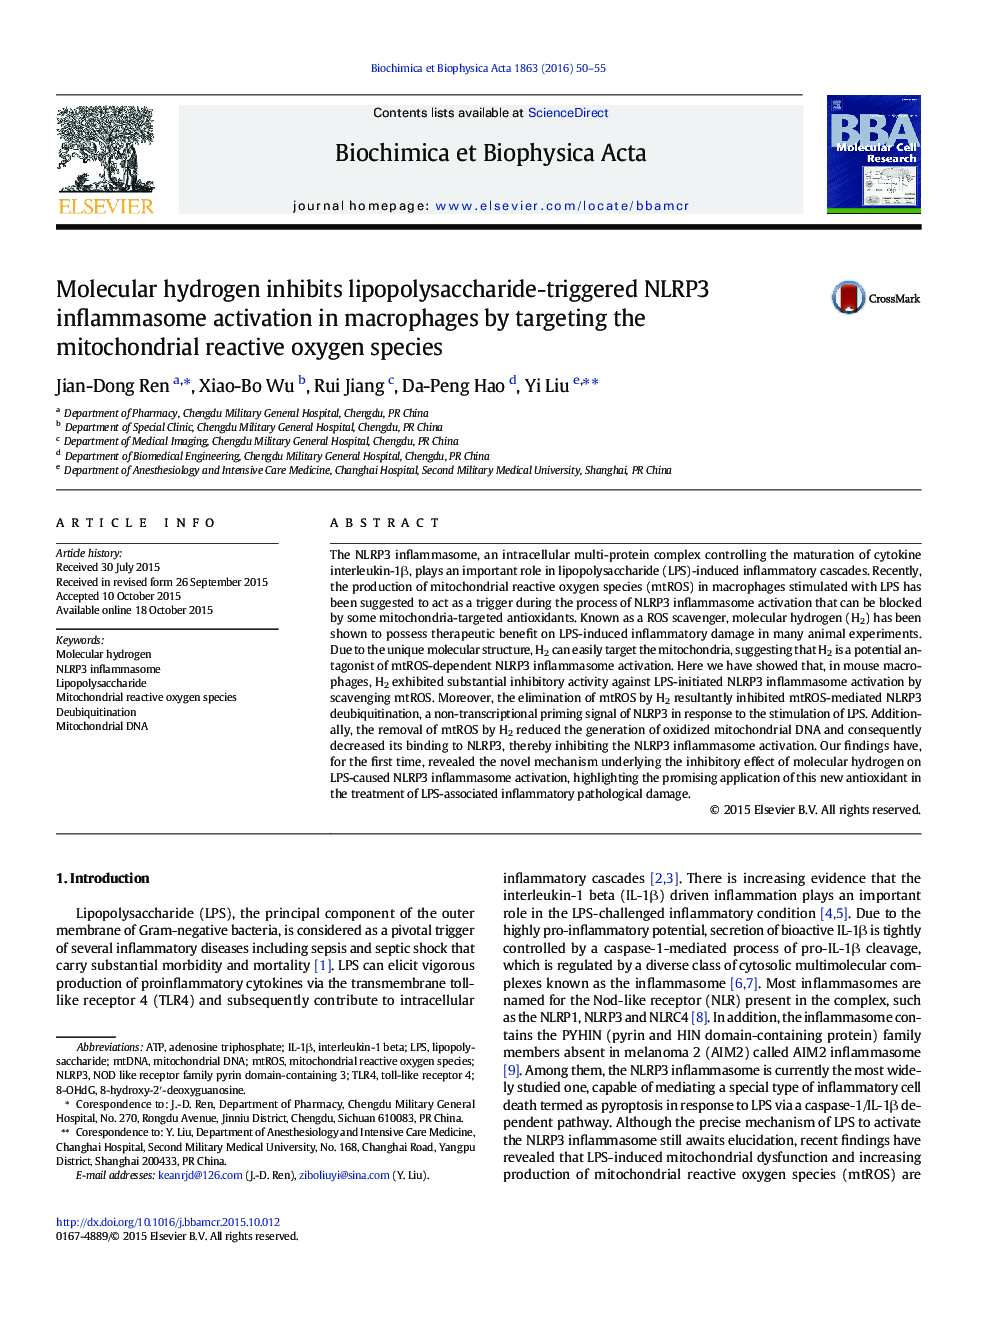 Molecular hydrogen inhibits lipopolysaccharide-triggered NLRP3 inflammasome activation in macrophages by targeting the mitochondrial reactive oxygen species